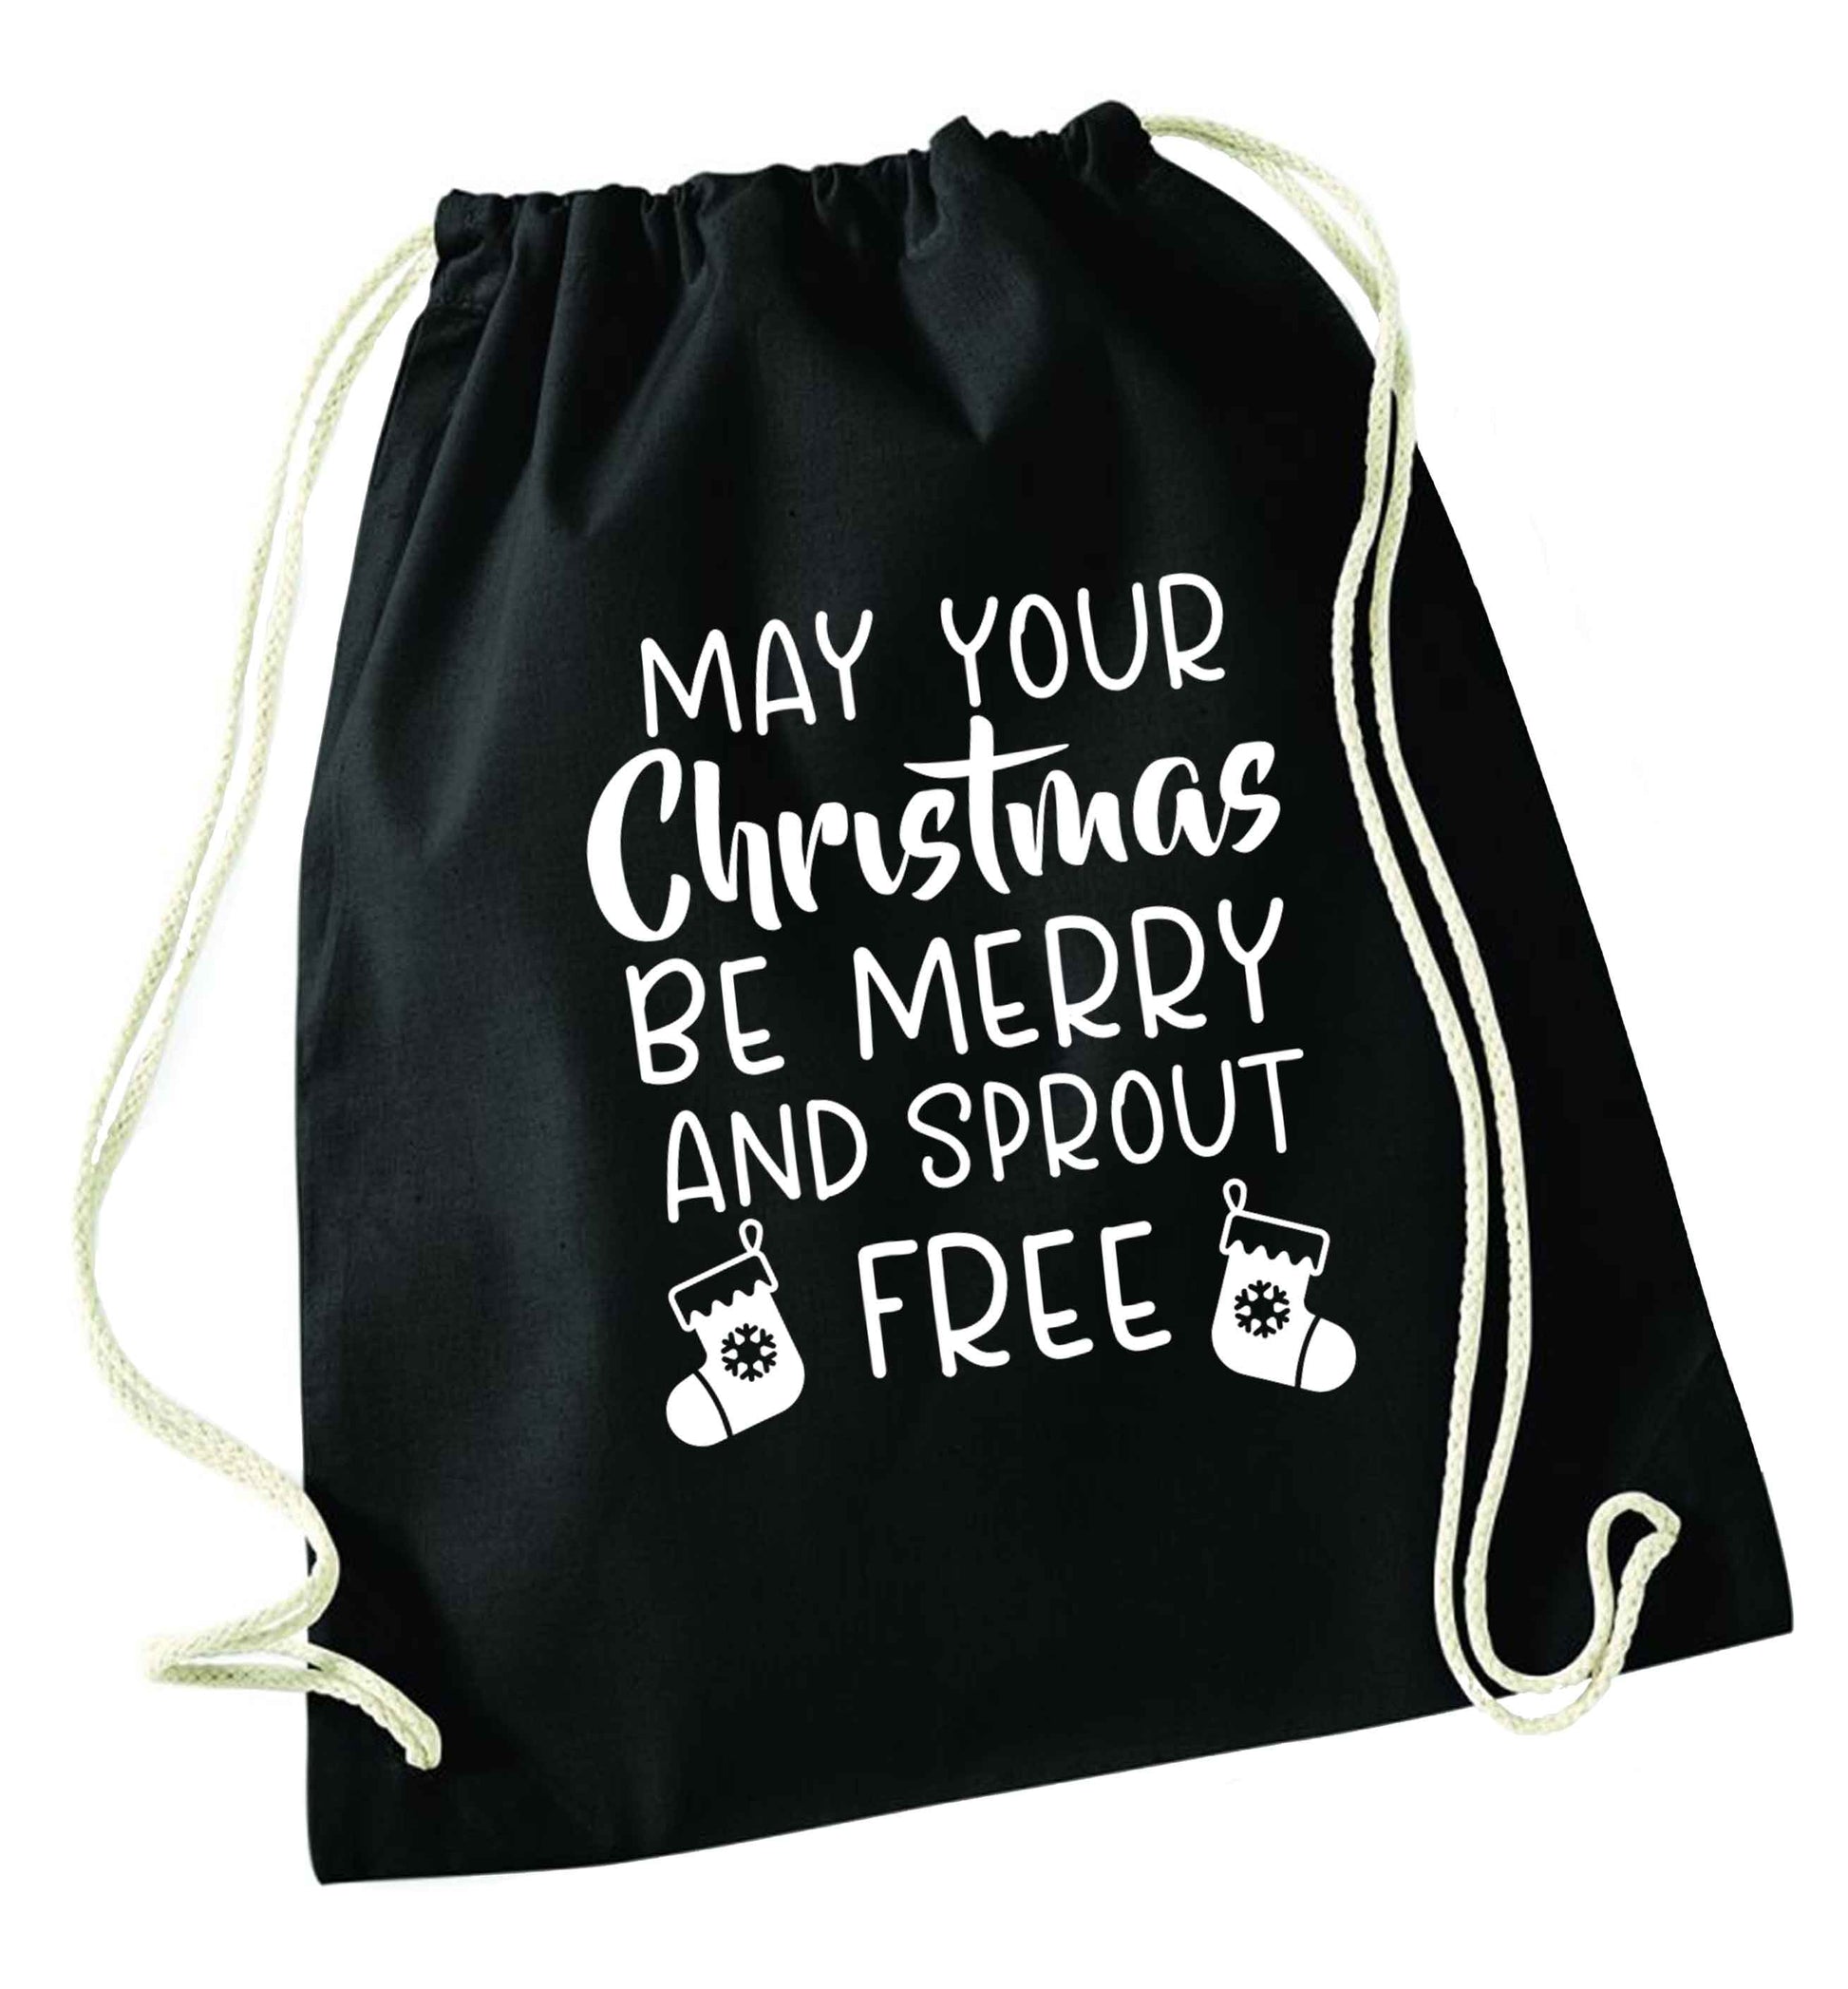 May your Christmas be merry and sprout free black drawstring bag